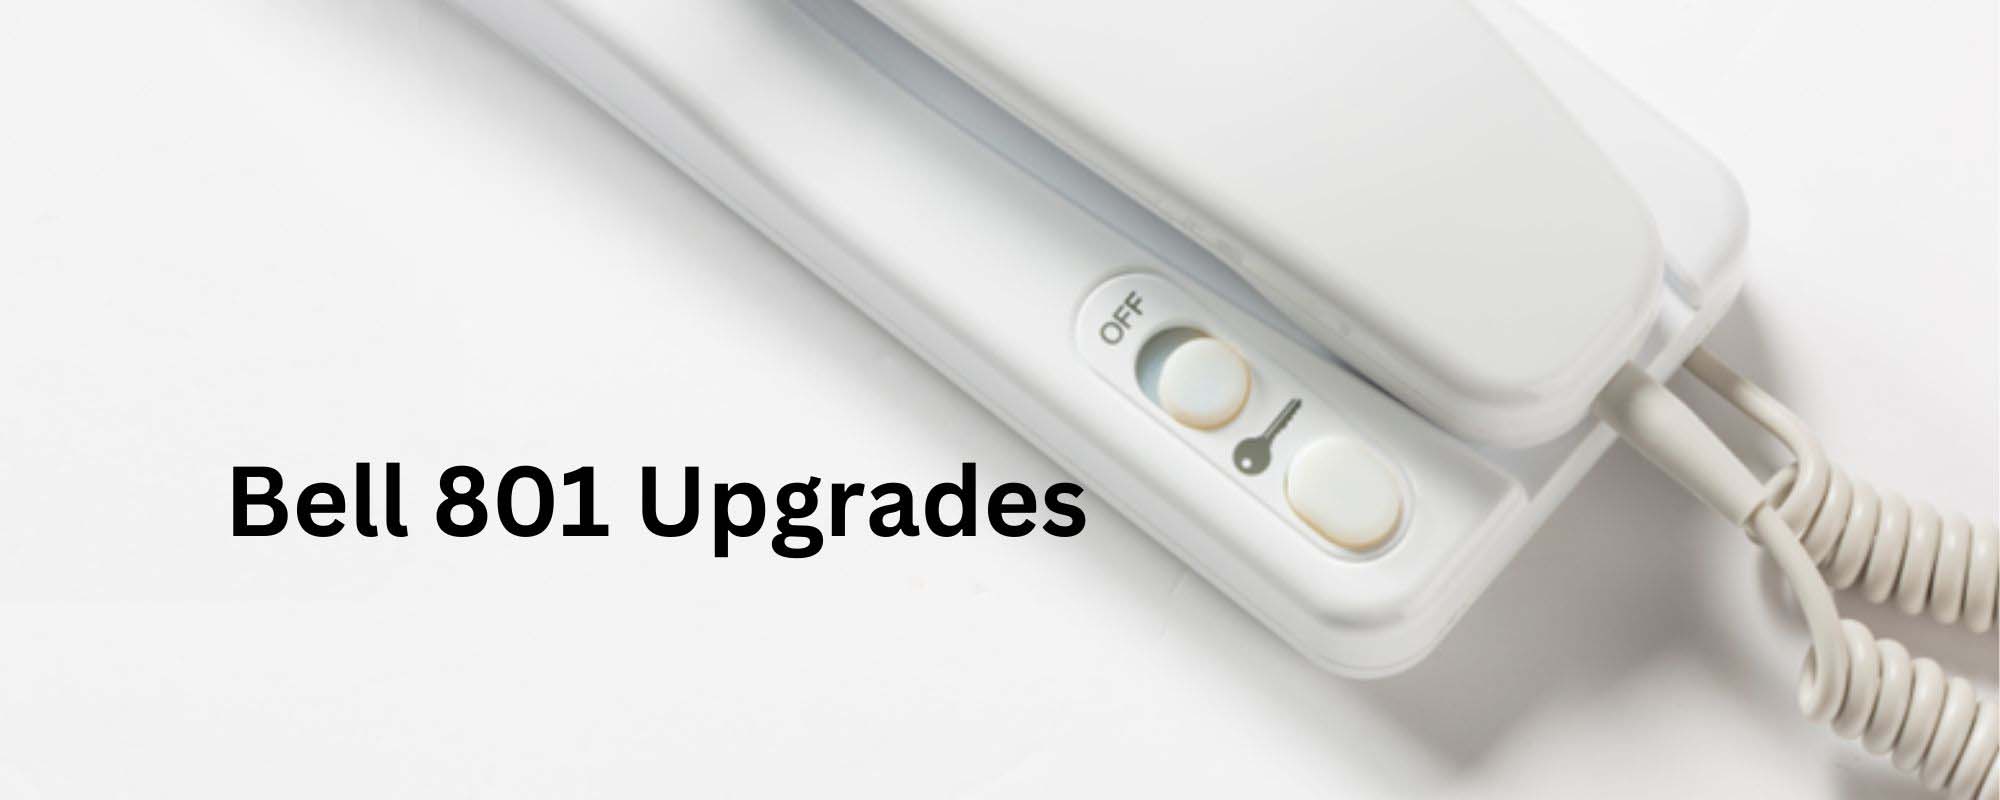 Why upgrade from the Bell 801 handset?